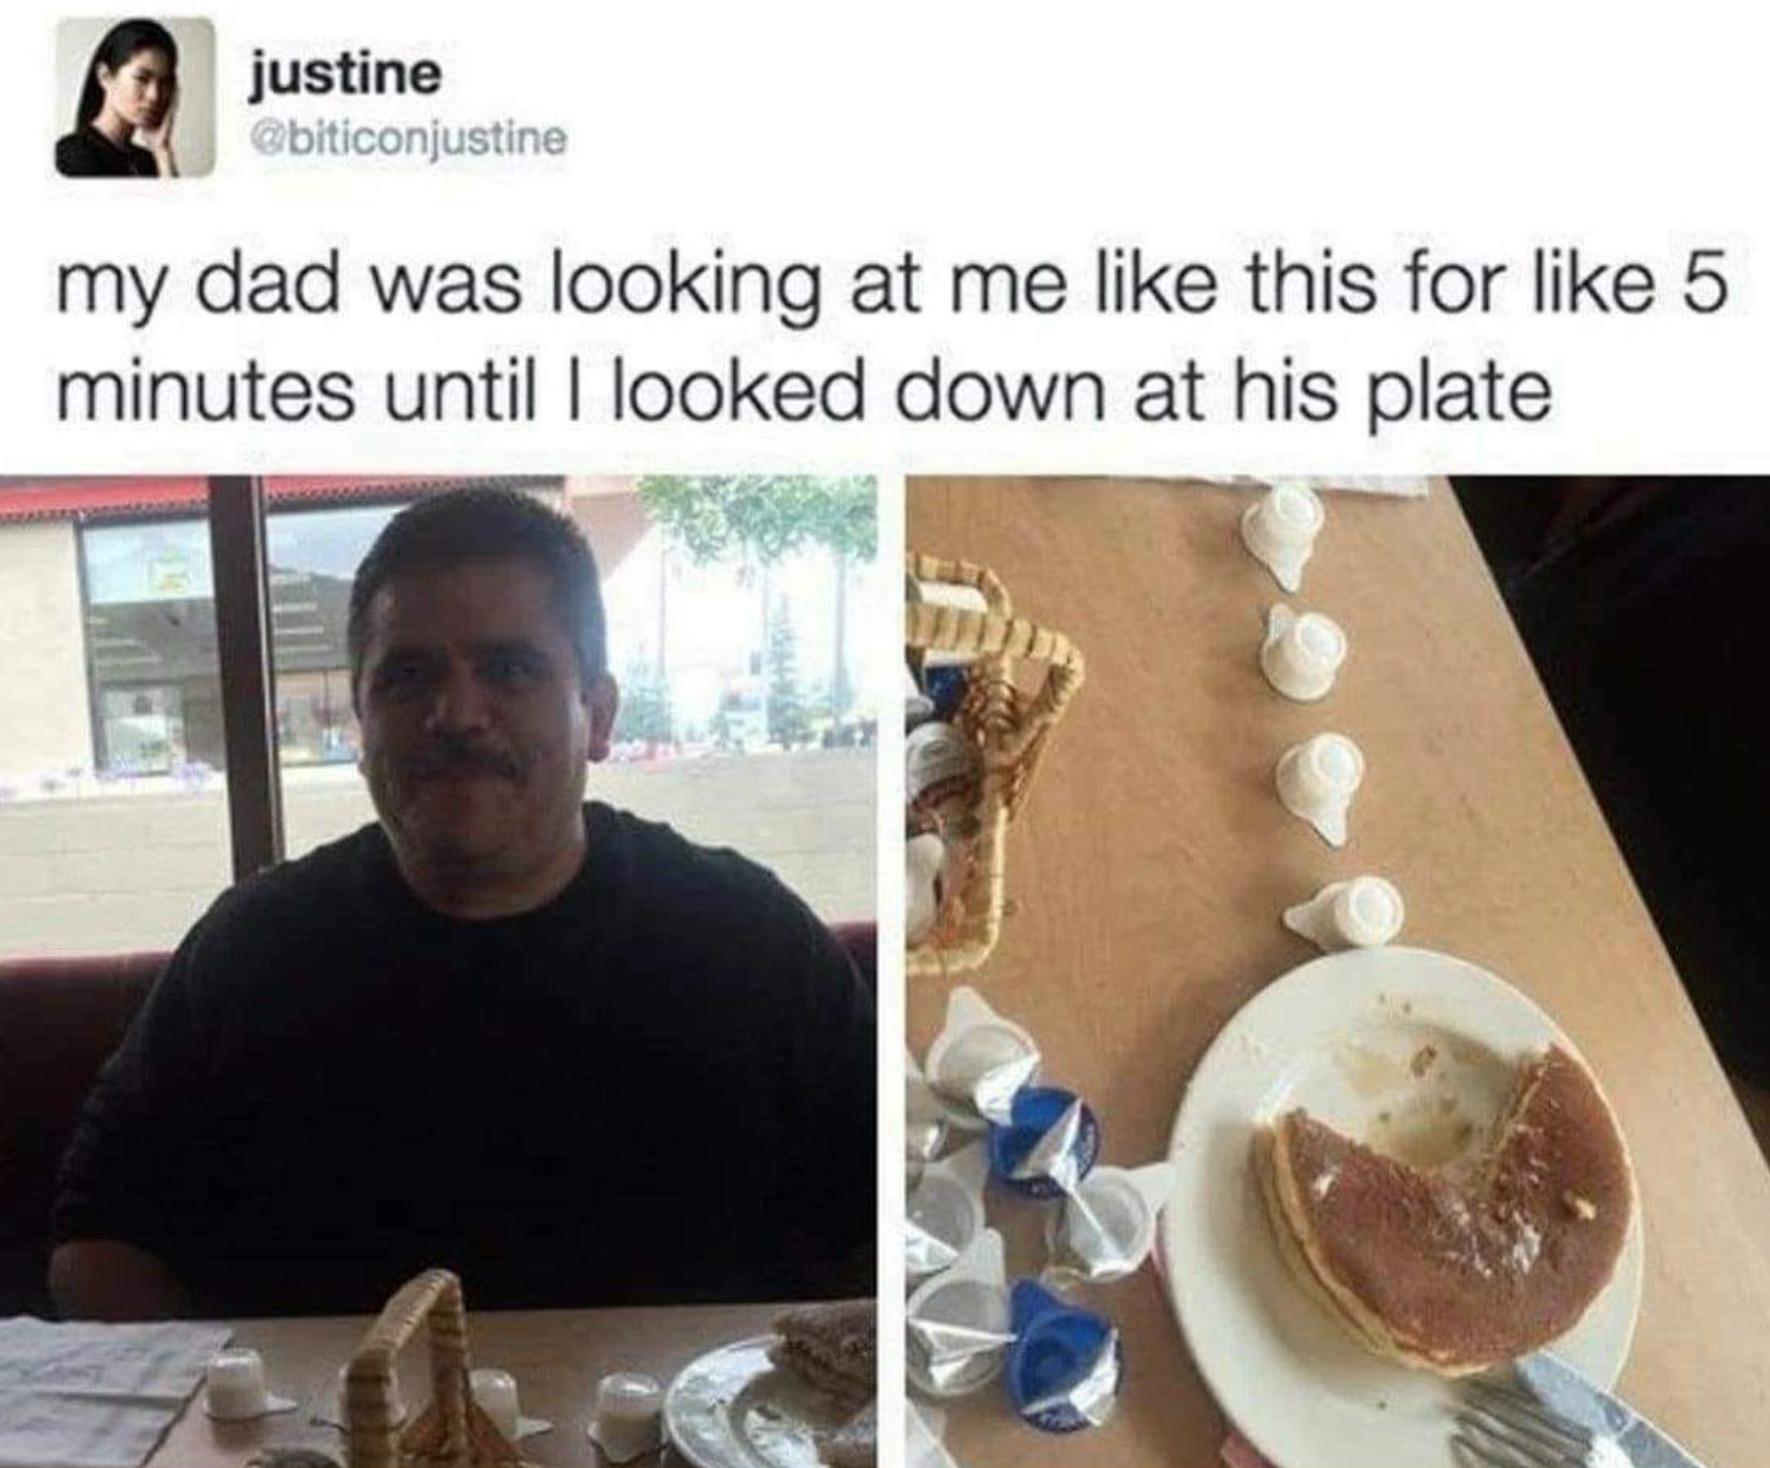 funny gaming memes - happy fathers day meme funny - justine my dad was looking at me this for 5 minutes until I looked down at his plate